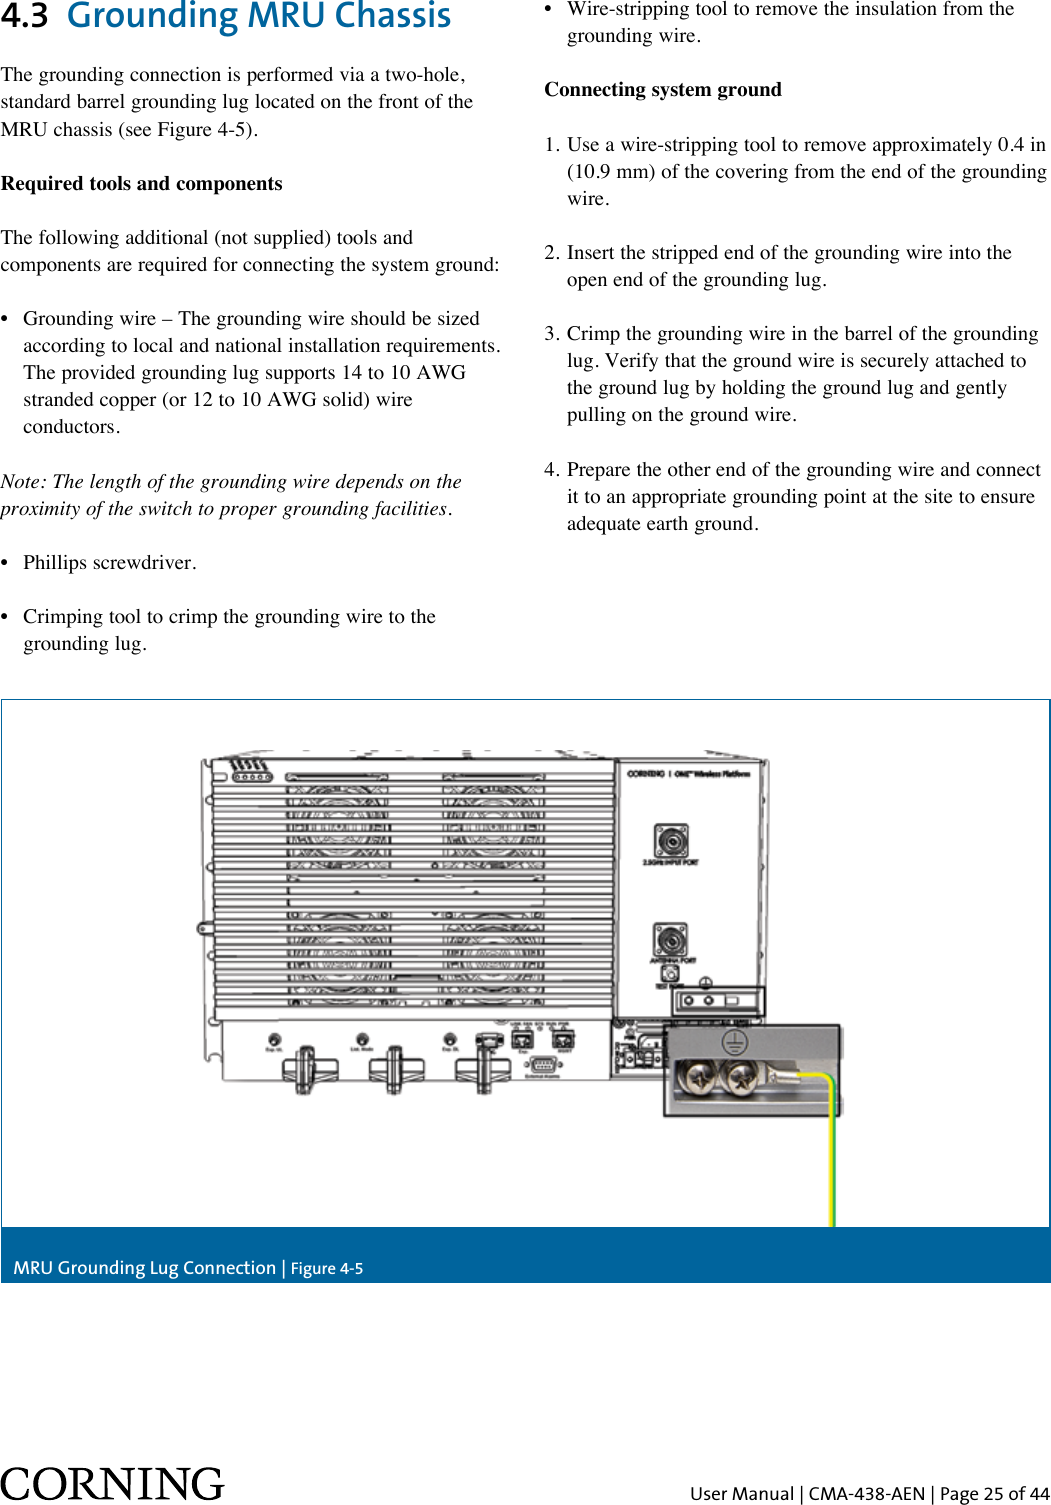 User Manual | CMA-438-AEN | Page 25 of 44MRU Grounding Lug Connection | Figure 4-54.3  Grounding MRU Chassis The grounding connection is performed via a two-hole, standard barrel grounding lug located on the front of the MRU chassis (see Figure 4-5). Required tools and componentsThe following additional (not supplied) tools and components are required for connecting the system ground:•   Grounding wire – The grounding wire should be sized according to local and national installation requirements. The provided grounding lug supports 14 to 10 AWG stranded copper (or 12 to 10 AWG solid) wire conductors. Note: The length of the grounding wire depends on the proximity of the switch to proper grounding facilities. •  Phillips screwdriver.•   Crimping tool to crimp the grounding wire to the grounding lug.•   Wire-stripping tool to remove the insulation from the grounding wire.Connecting system ground1.  Use a wire-stripping tool to remove approximately 0.4 in (10.9 mm) of the covering from the end of the grounding wire.2.  Insert the stripped end of the grounding wire into the open end of the grounding lug.3.  Crimp the grounding wire in the barrel of the grounding lug. Verify that the ground wire is securely attached to the ground lug by holding the ground lug and gently pulling on the ground wire.4.  Prepare the other end of the grounding wire and connect it to an appropriate grounding point at the site to ensure adequate earth ground. 